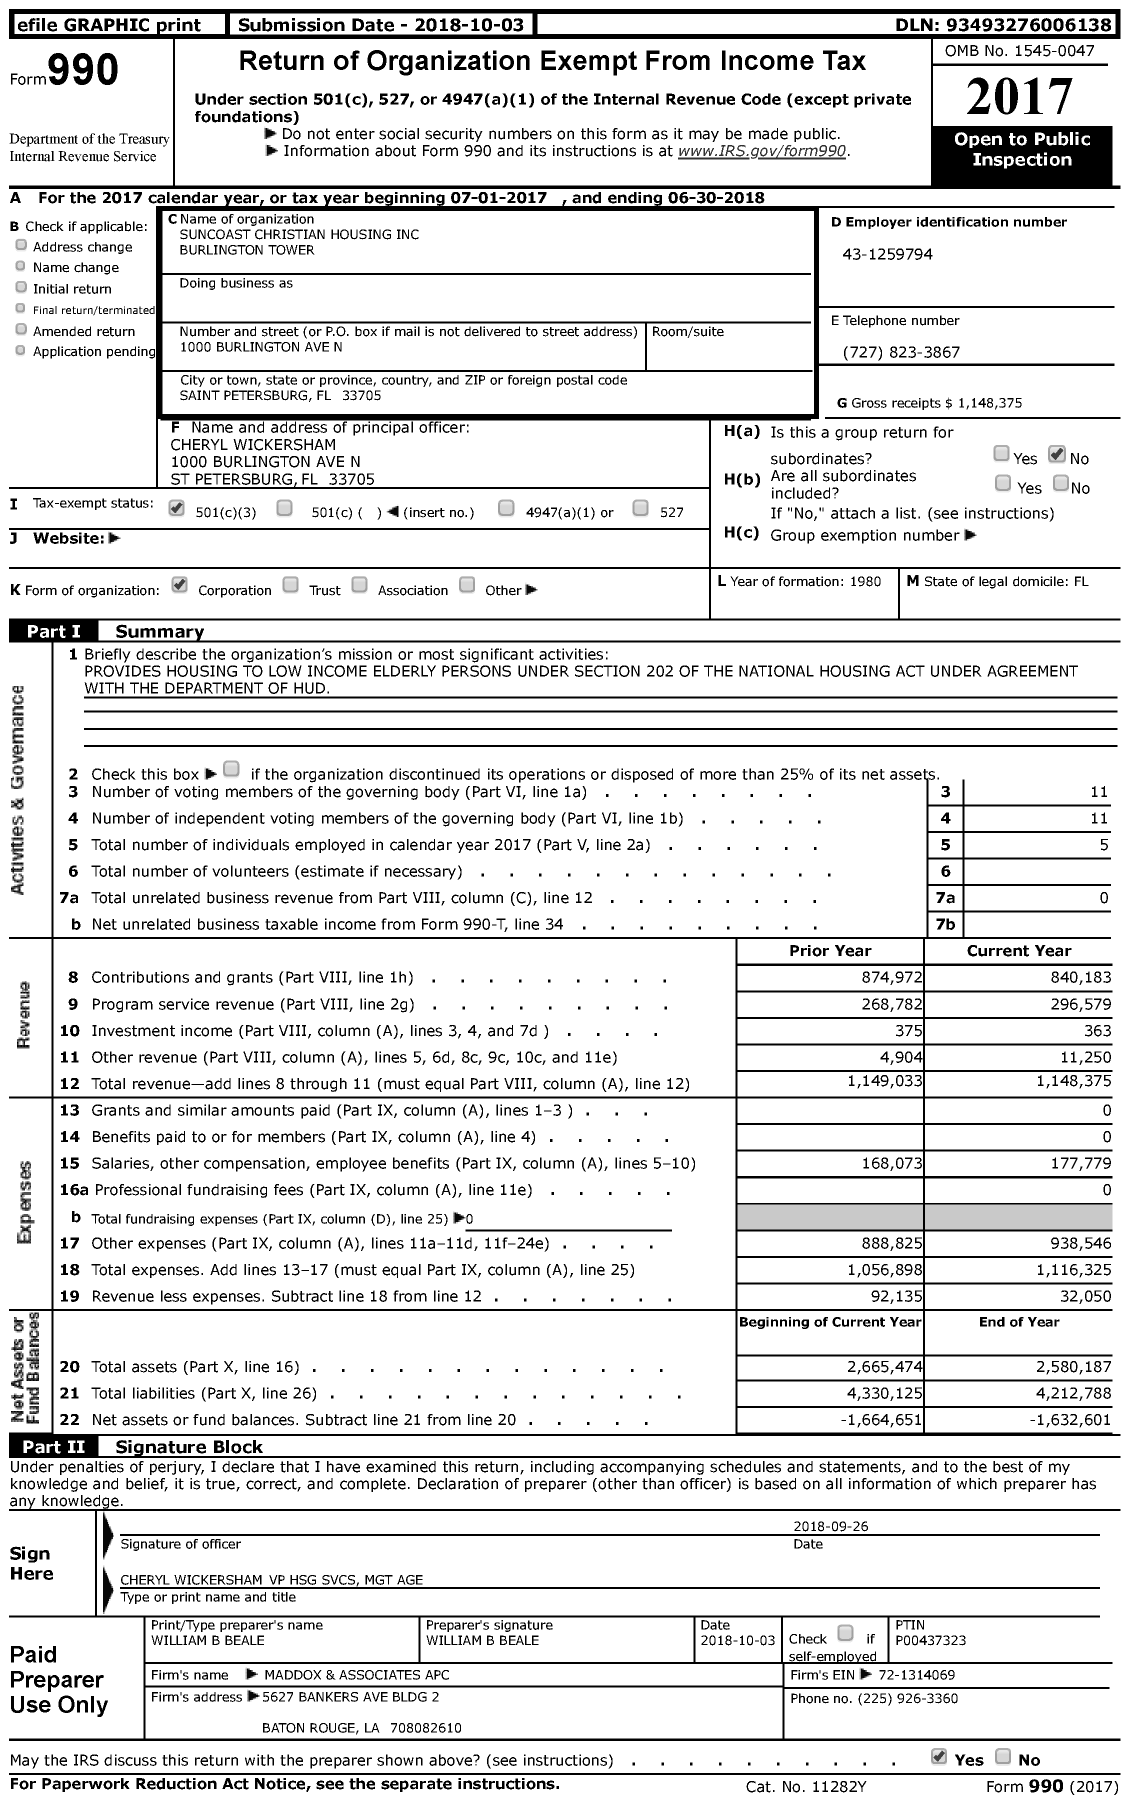 Image of first page of 2017 Form 990 for Suncoast Christian Housing Inc Burlington Tower